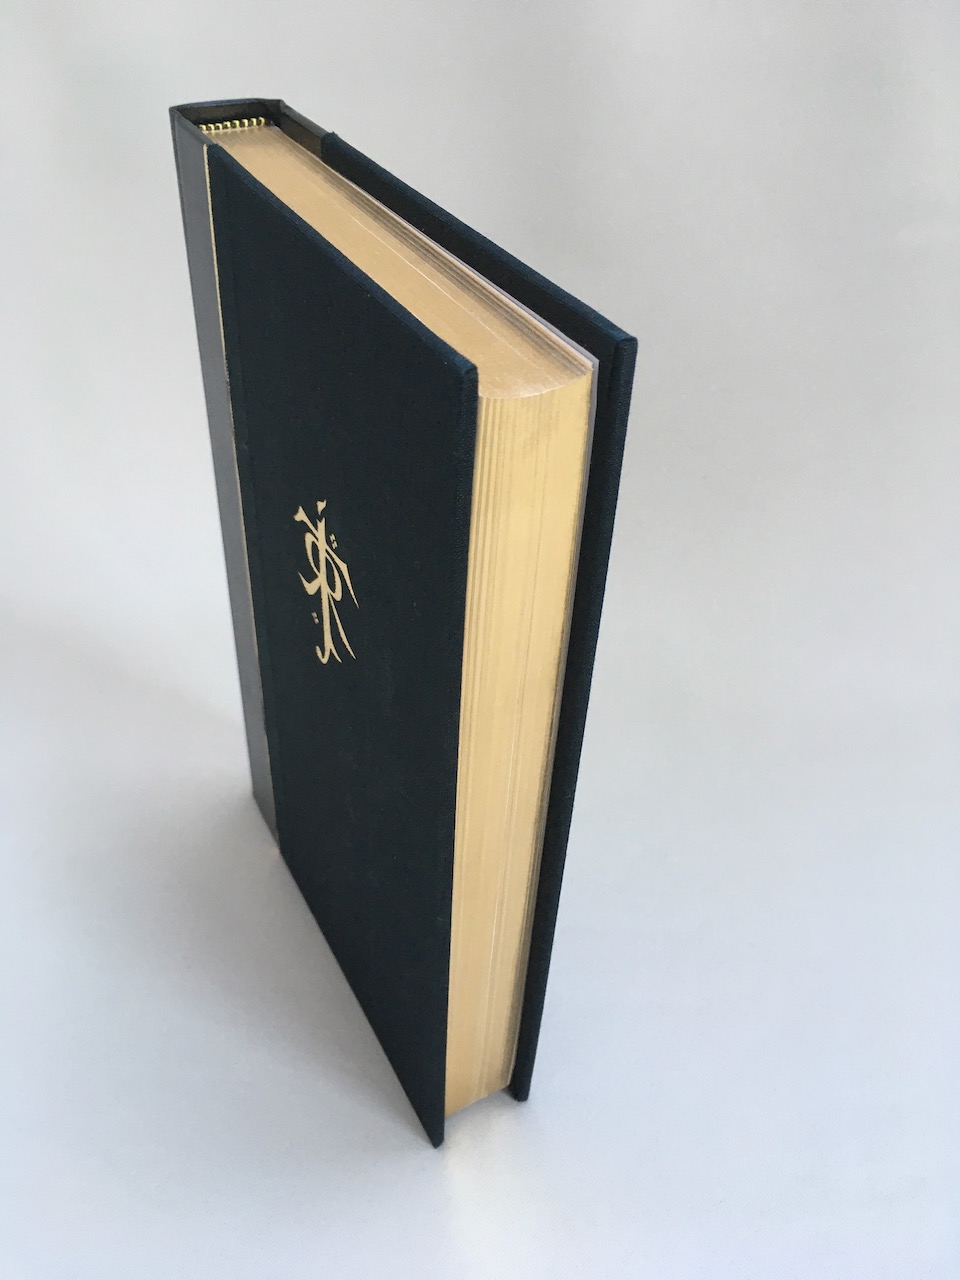 Lord of the Rings, Harper Collins Deluxe Limited Edition of 2001 - Black Leather 12